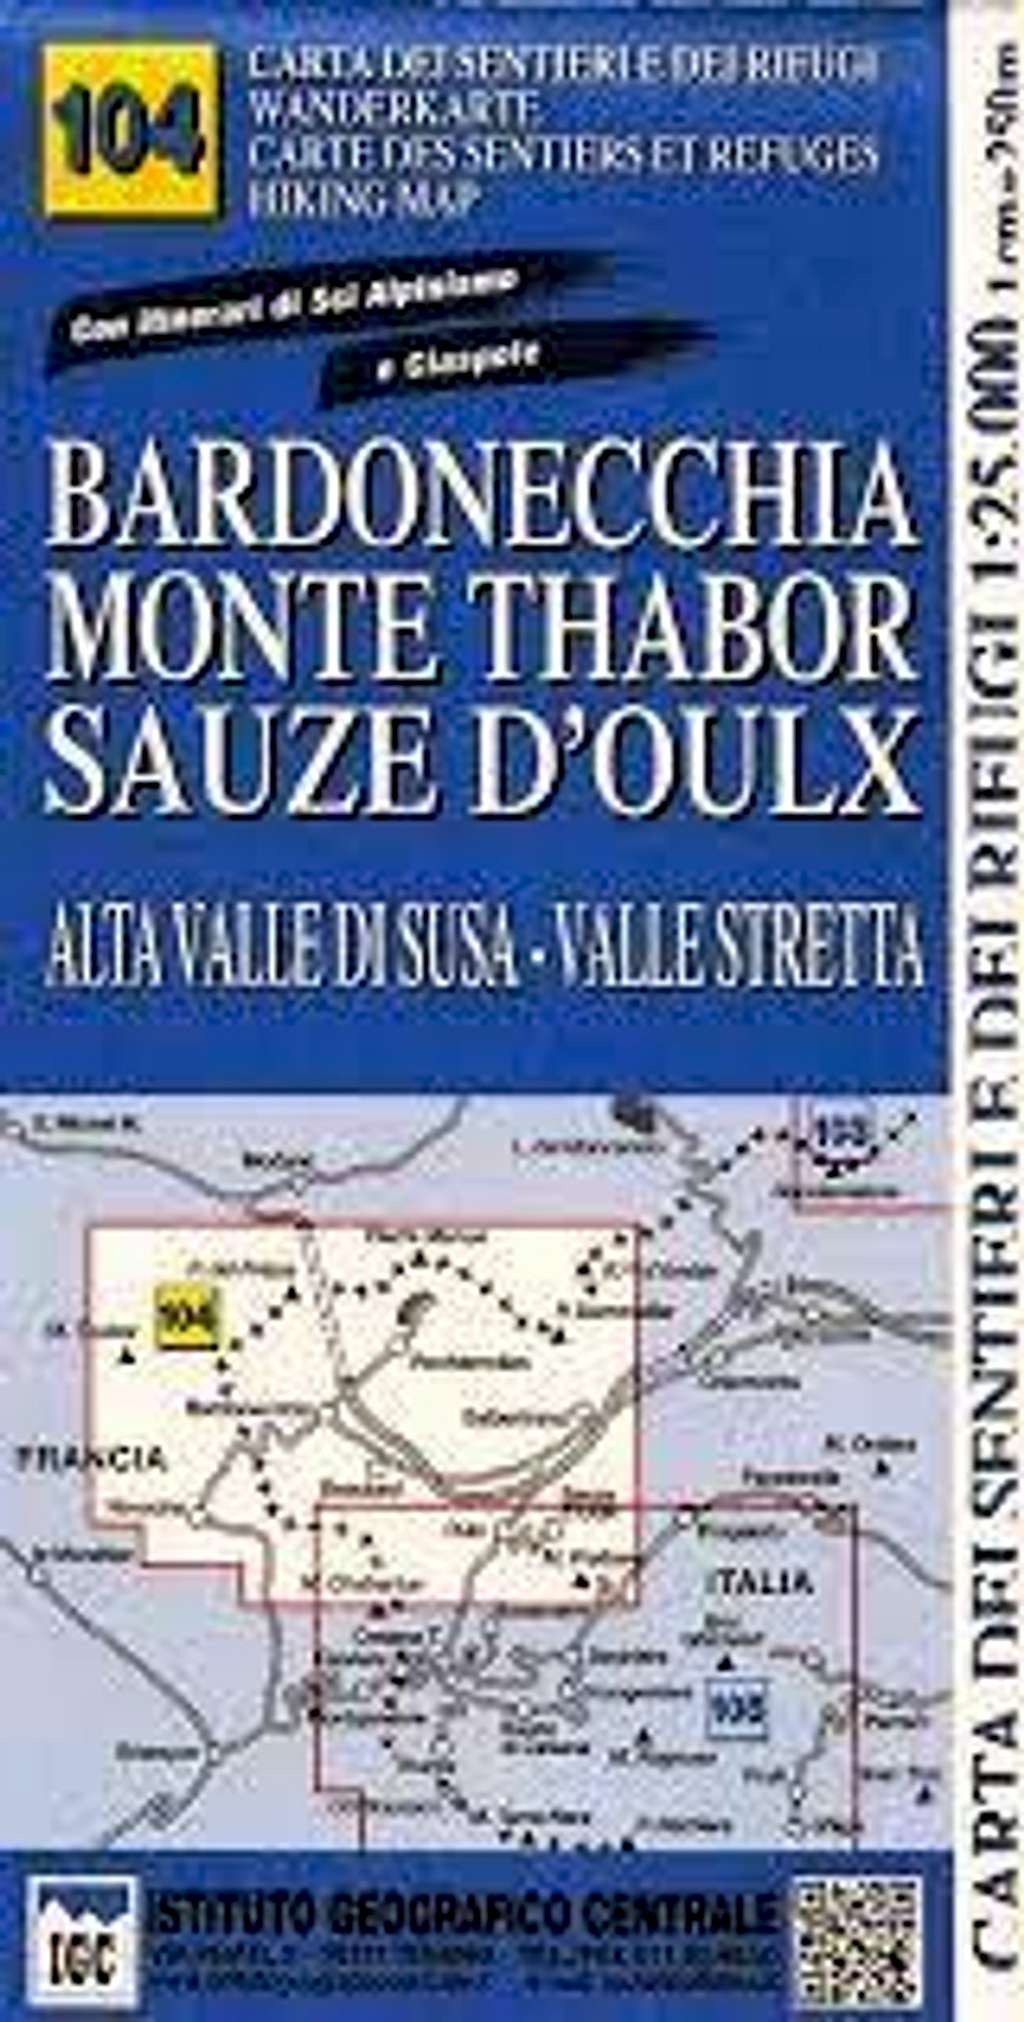 Monte Thabor map